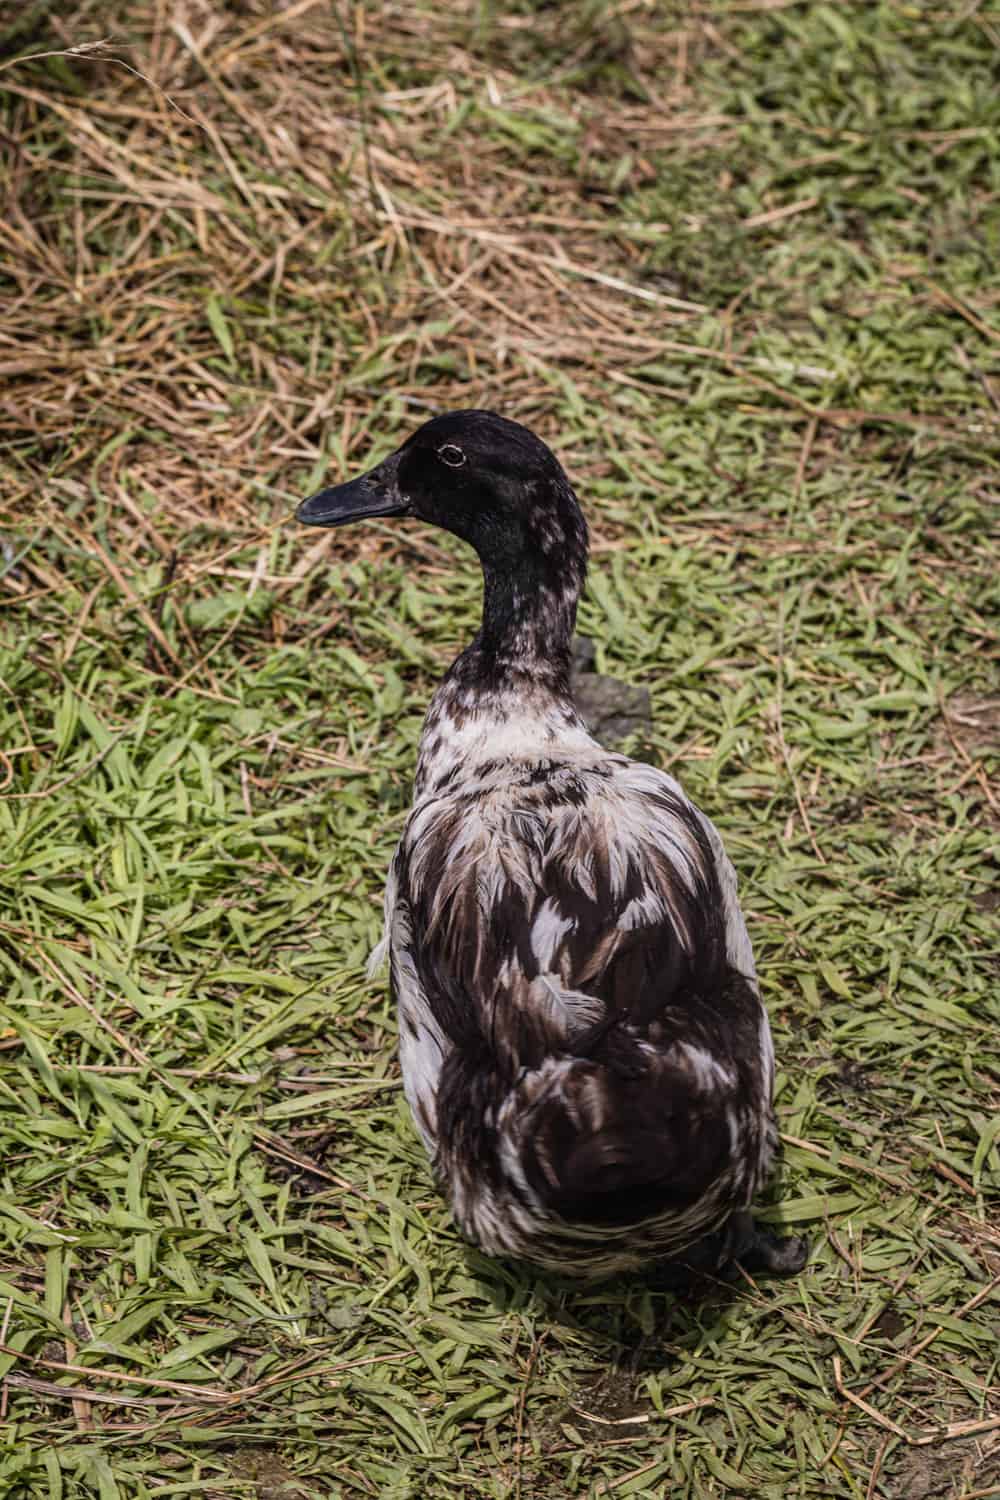 A beautiful black duck in the Amber Waves farm.